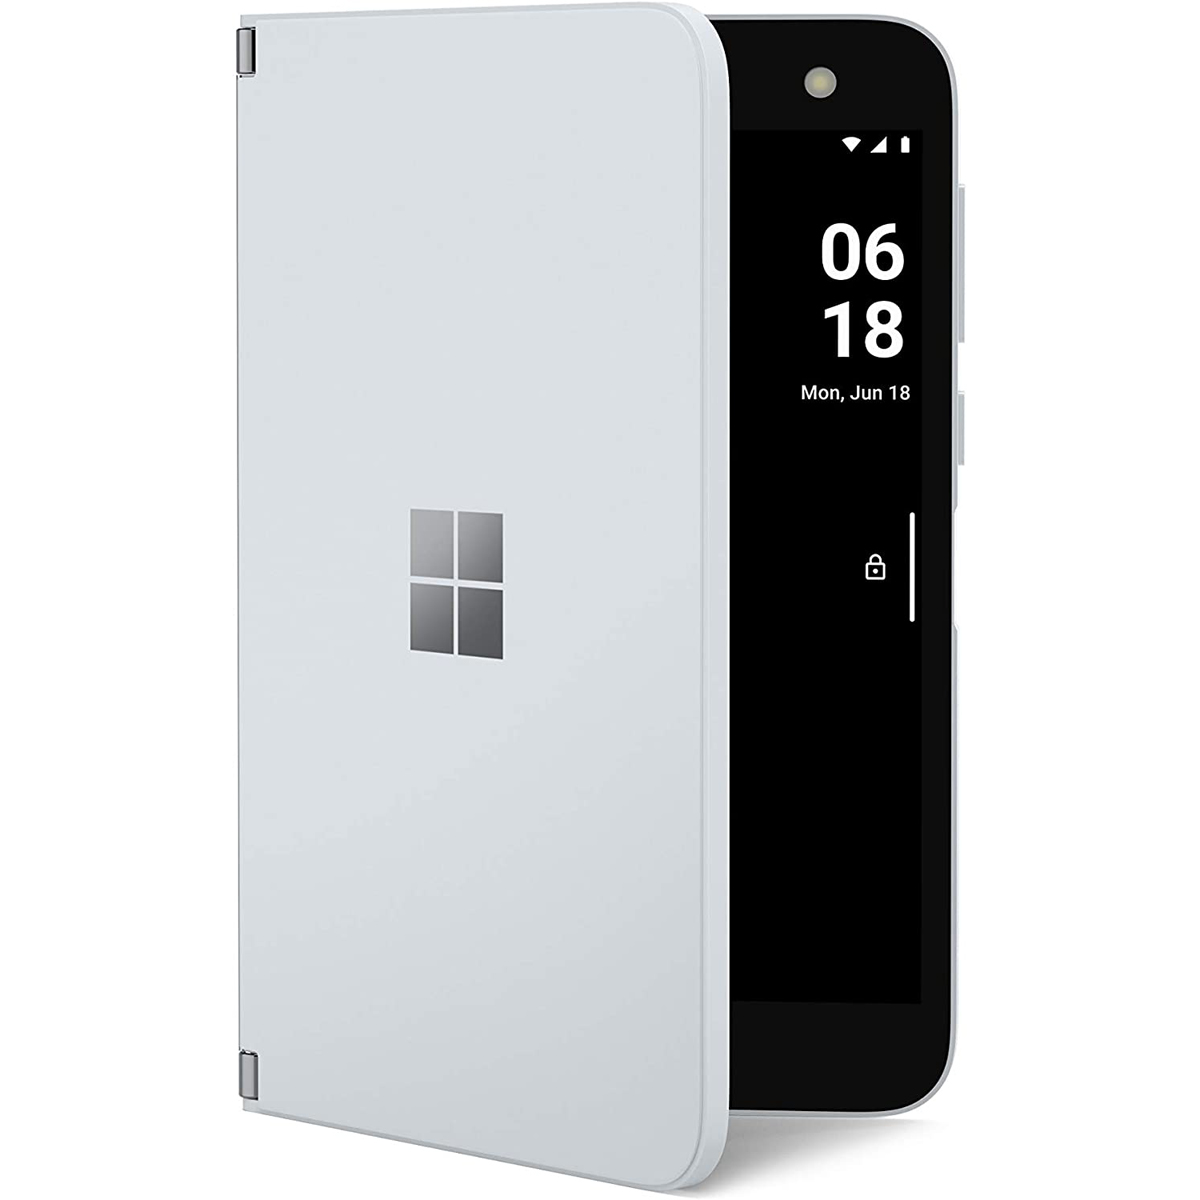 Microsoft Surface Duo - for Business - 4G Smartphone - Dual-SIM - RAM 6 GB 128 GB - OLED display - image 2 of 10